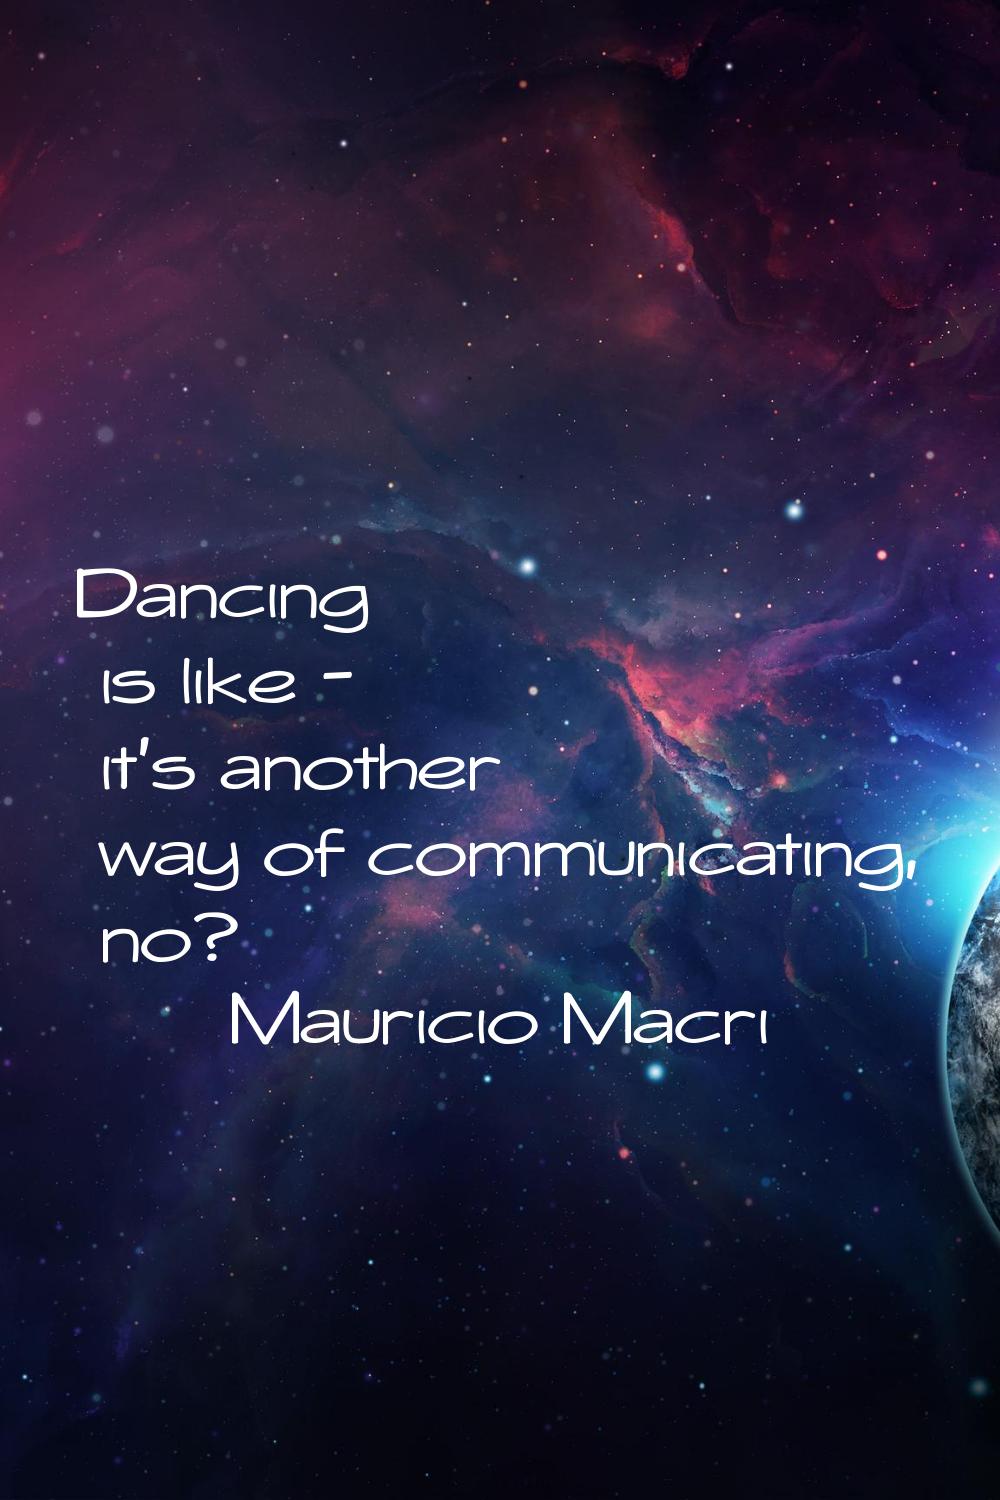 Dancing is like - it's another way of communicating, no?